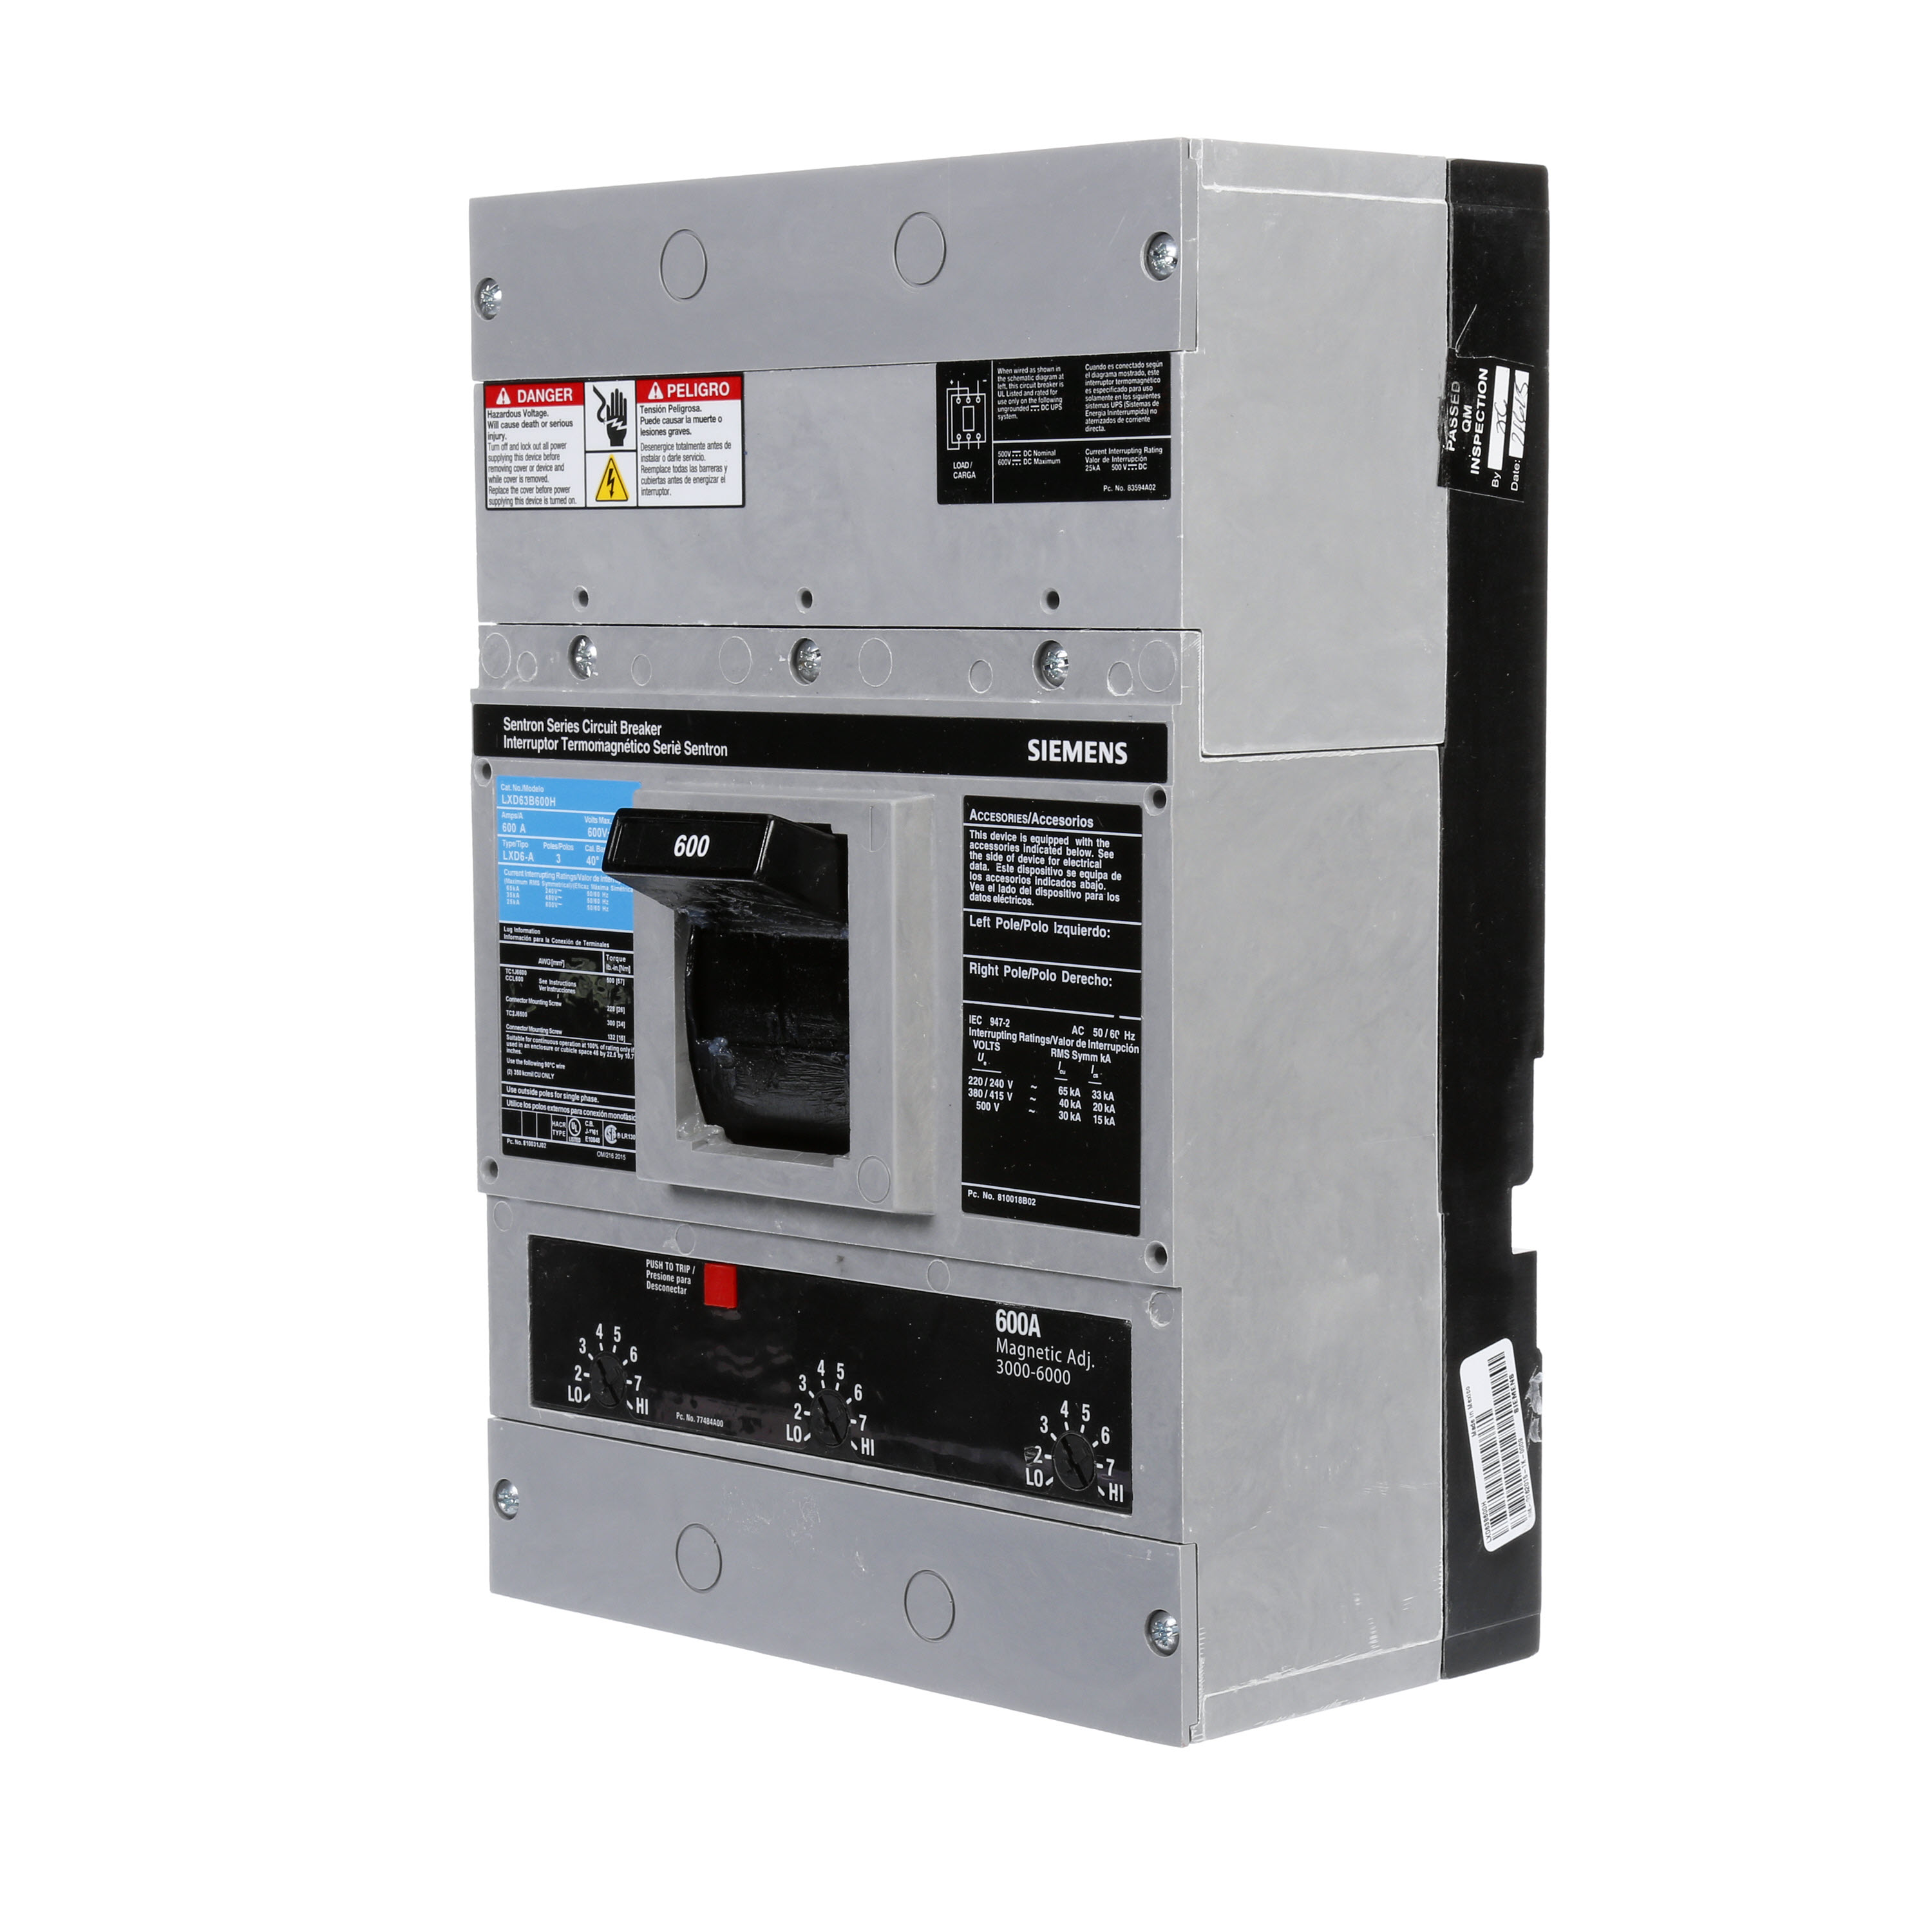 SIEMENS LOW VOLTAGE SENTRON MOLDED CASE CIRCUIT BREAKER WITH THERMAL - MAGNETICTRIP UNIT. ASSEMBLED 100 PERCENT RATED STANDARD 40 DEG C BREAKER LD FRAME WITH STANDARD BREAKING CAPACITY. 600A 3-POLE (25KAIC AT 600V) (35KAIC AT 480V). NON-INTERCHANGEABLE TRIP UNIT. SPECIAL FEATURES NO LUGS INSTALLED. DIMENSIONS (W x H x D) IN 7.50 x 11.0 x 4.00.